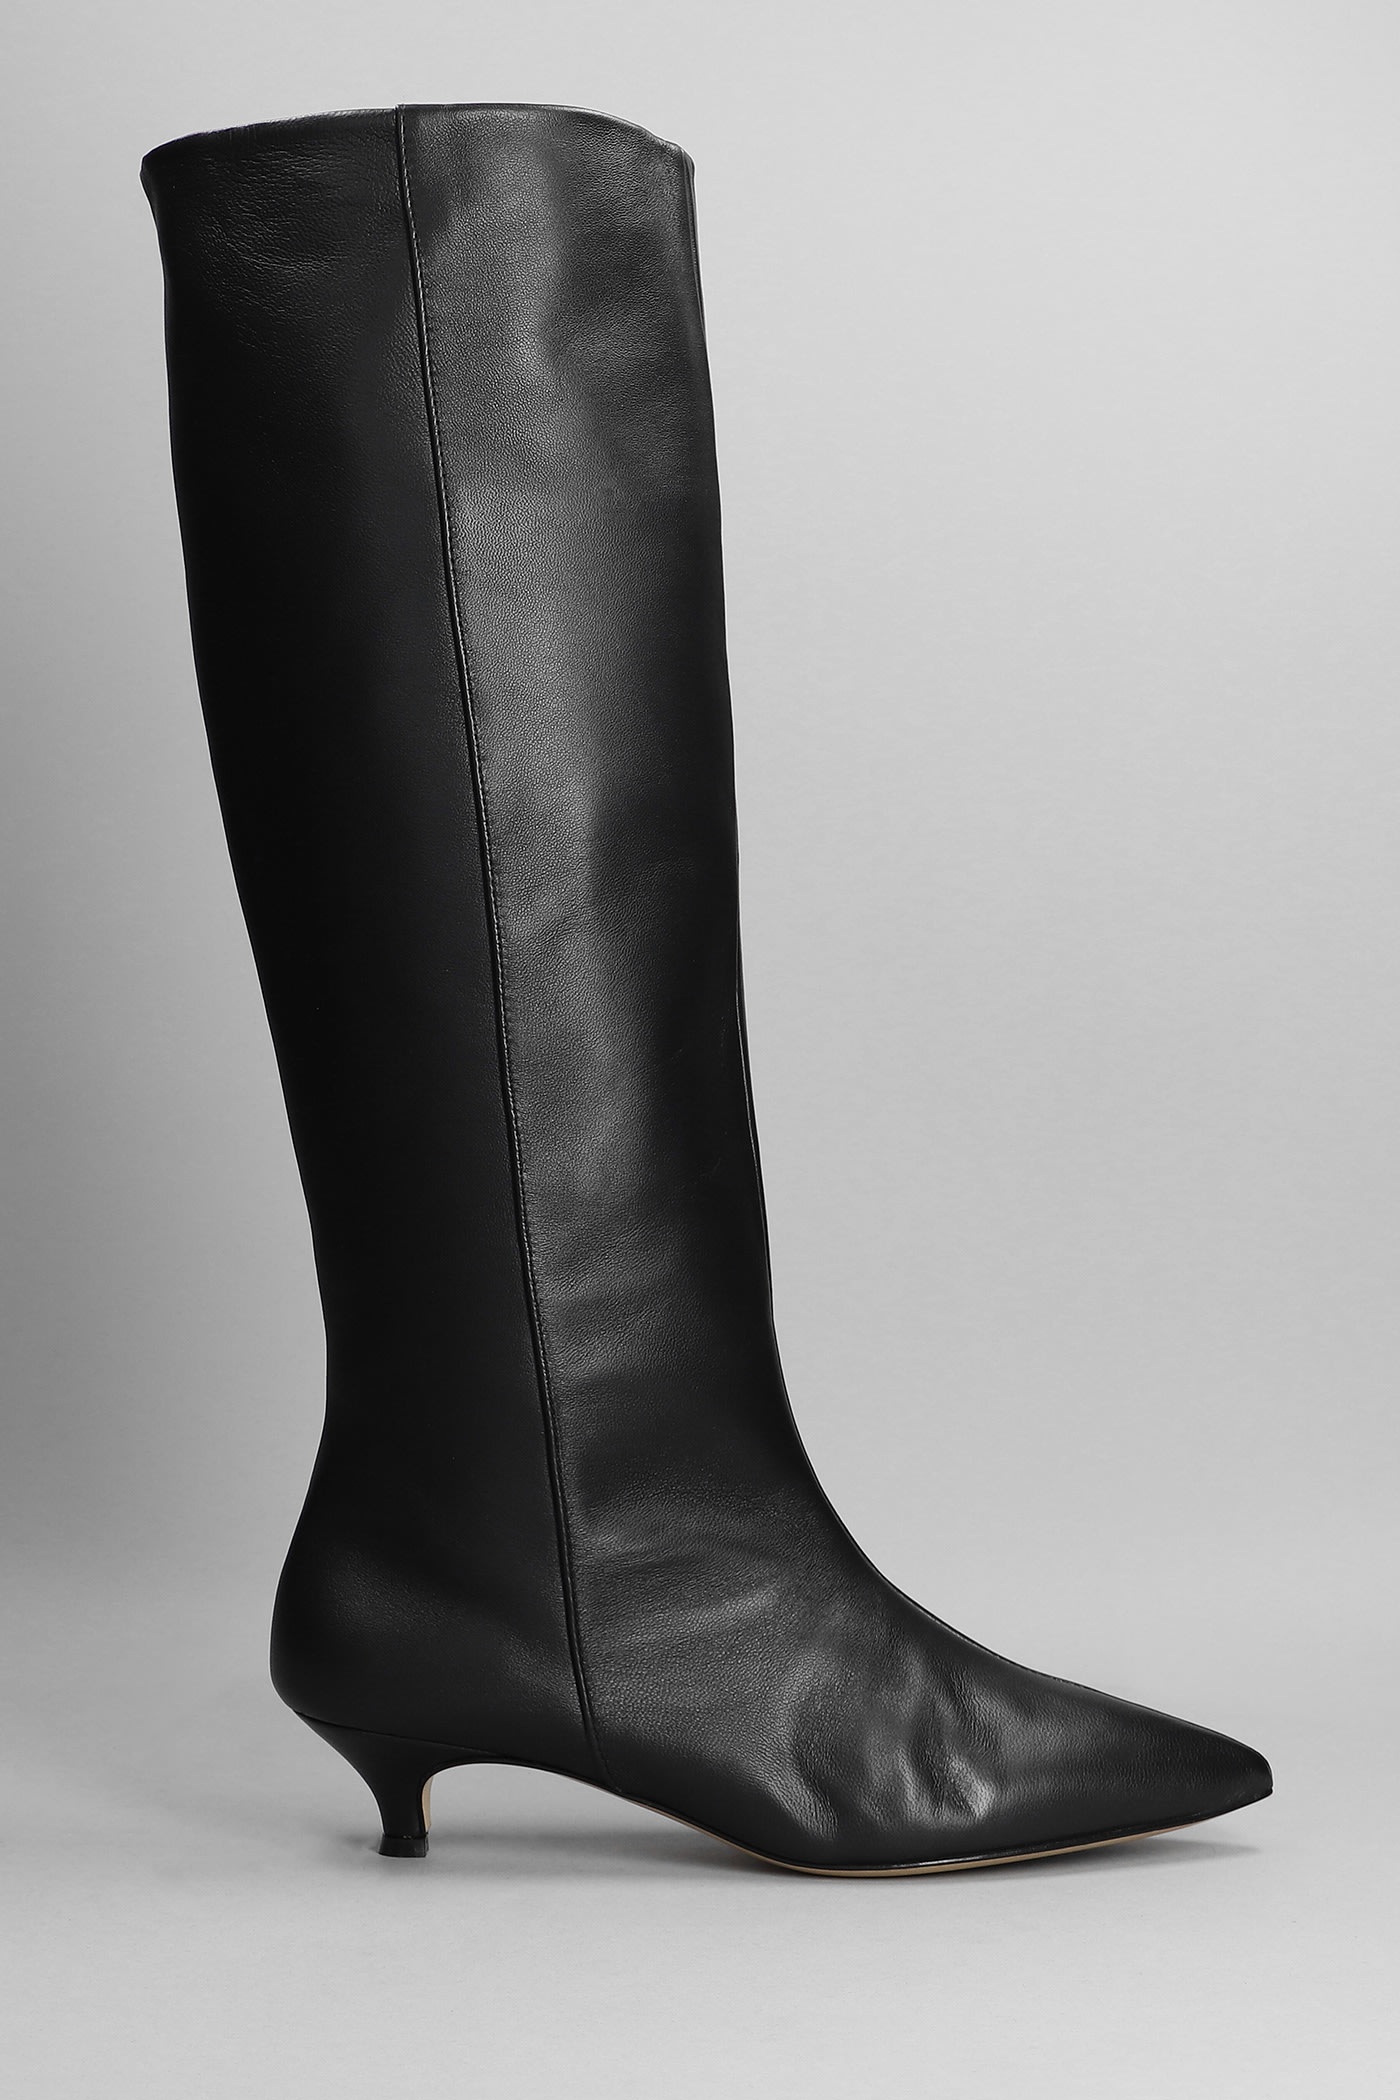 Alchimia High Heels Boots In Black Leather